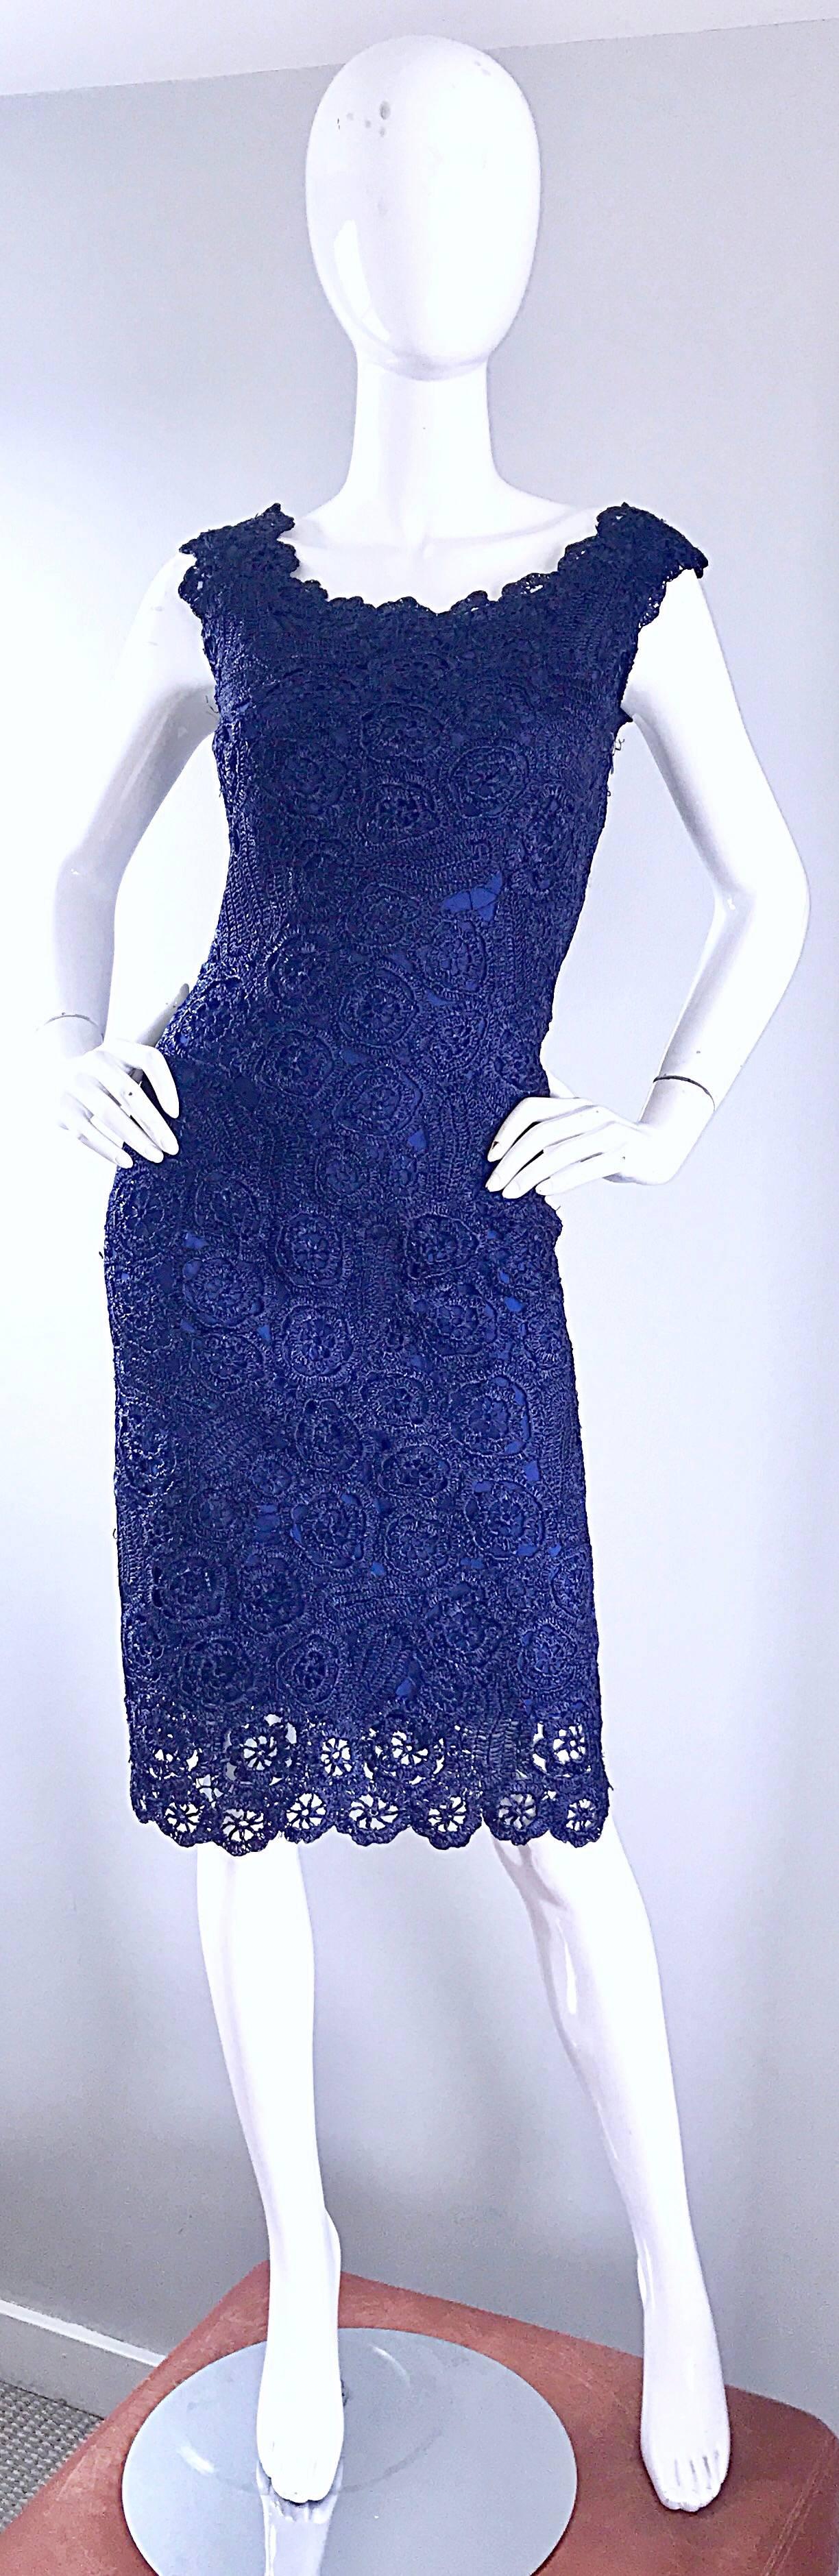 Smashing 1950s Demi Couture navy blue raffia dress! Vibrant navy blue raffia with an attached silk lining. Full metal zipper up the side with hook-and-eye closure. Bombshell fit, with a fitted bodice and cap sleeves. Extremely flattering fit that